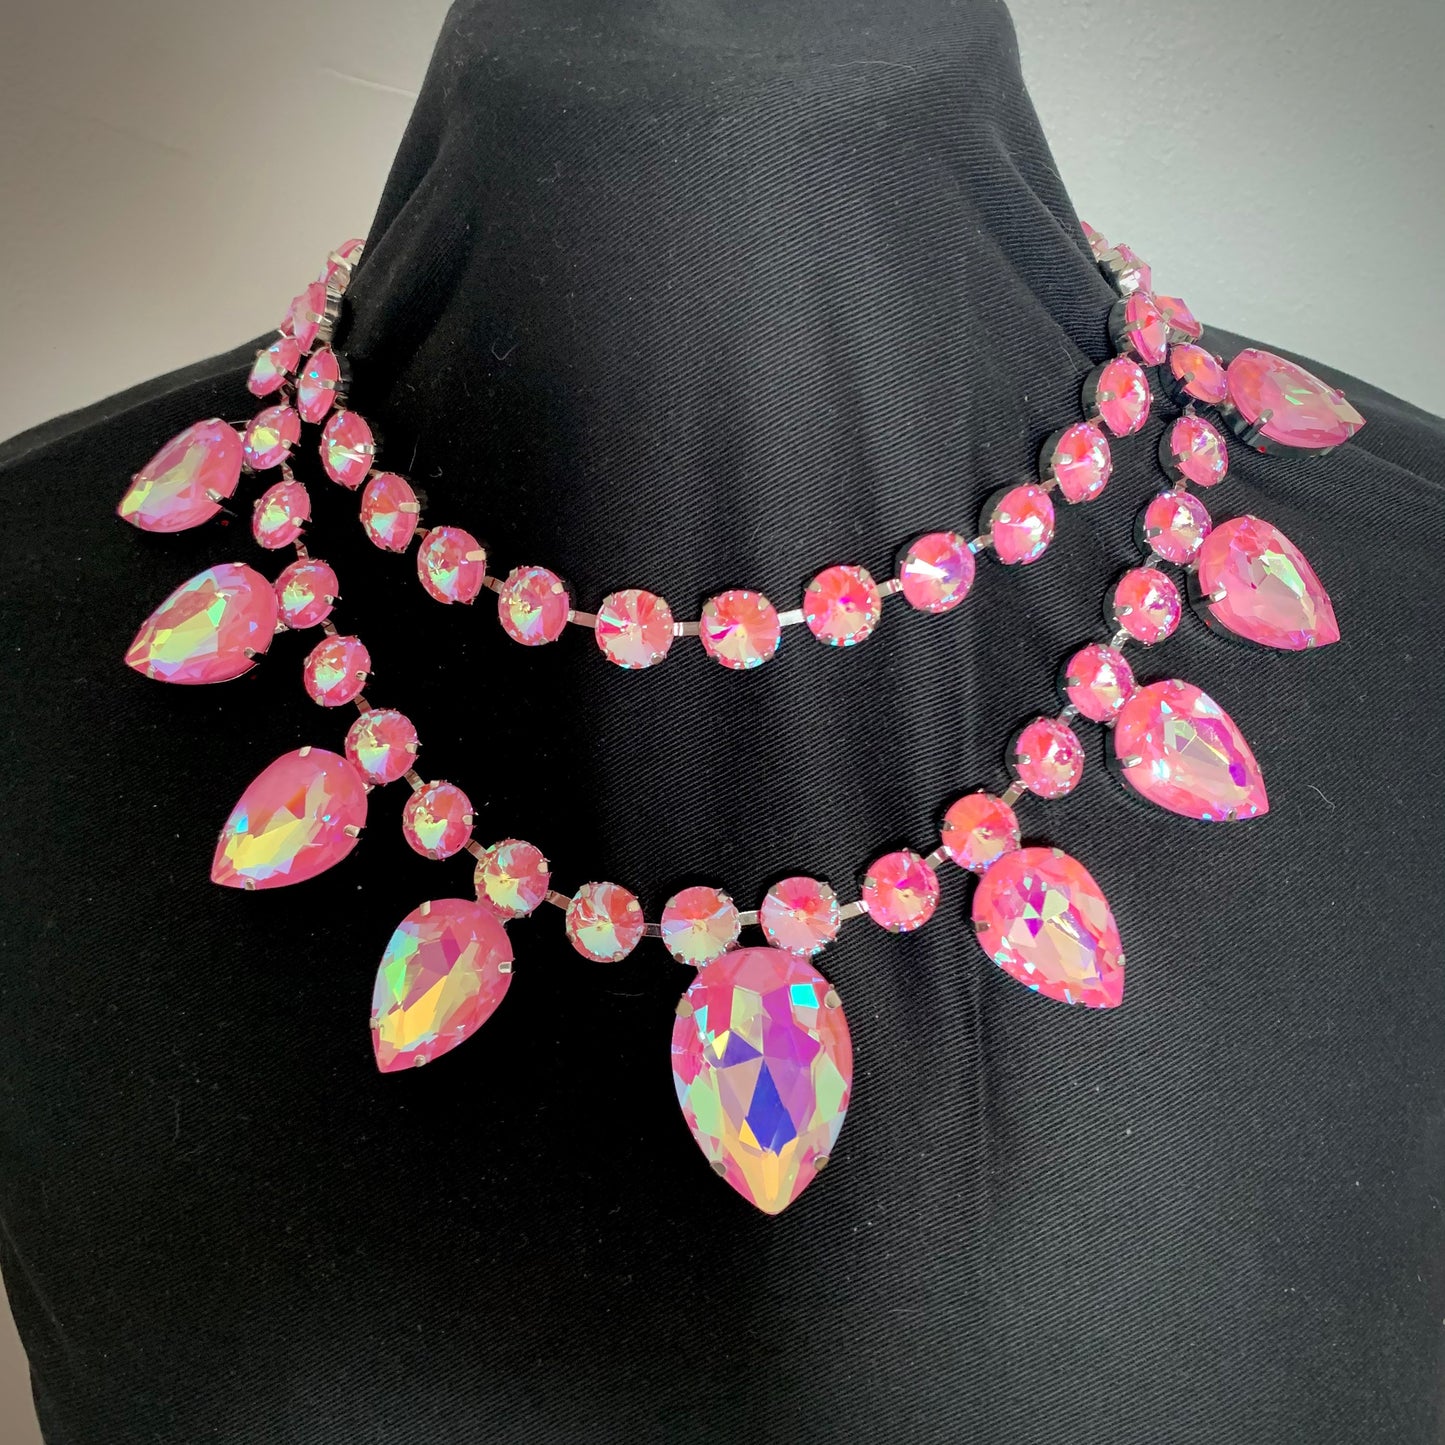 Pink AB Double necklace / bespoke Necklace / Adjustable / Drag Queen Costume Jewelry / Cocktails Jewellery  / Queer